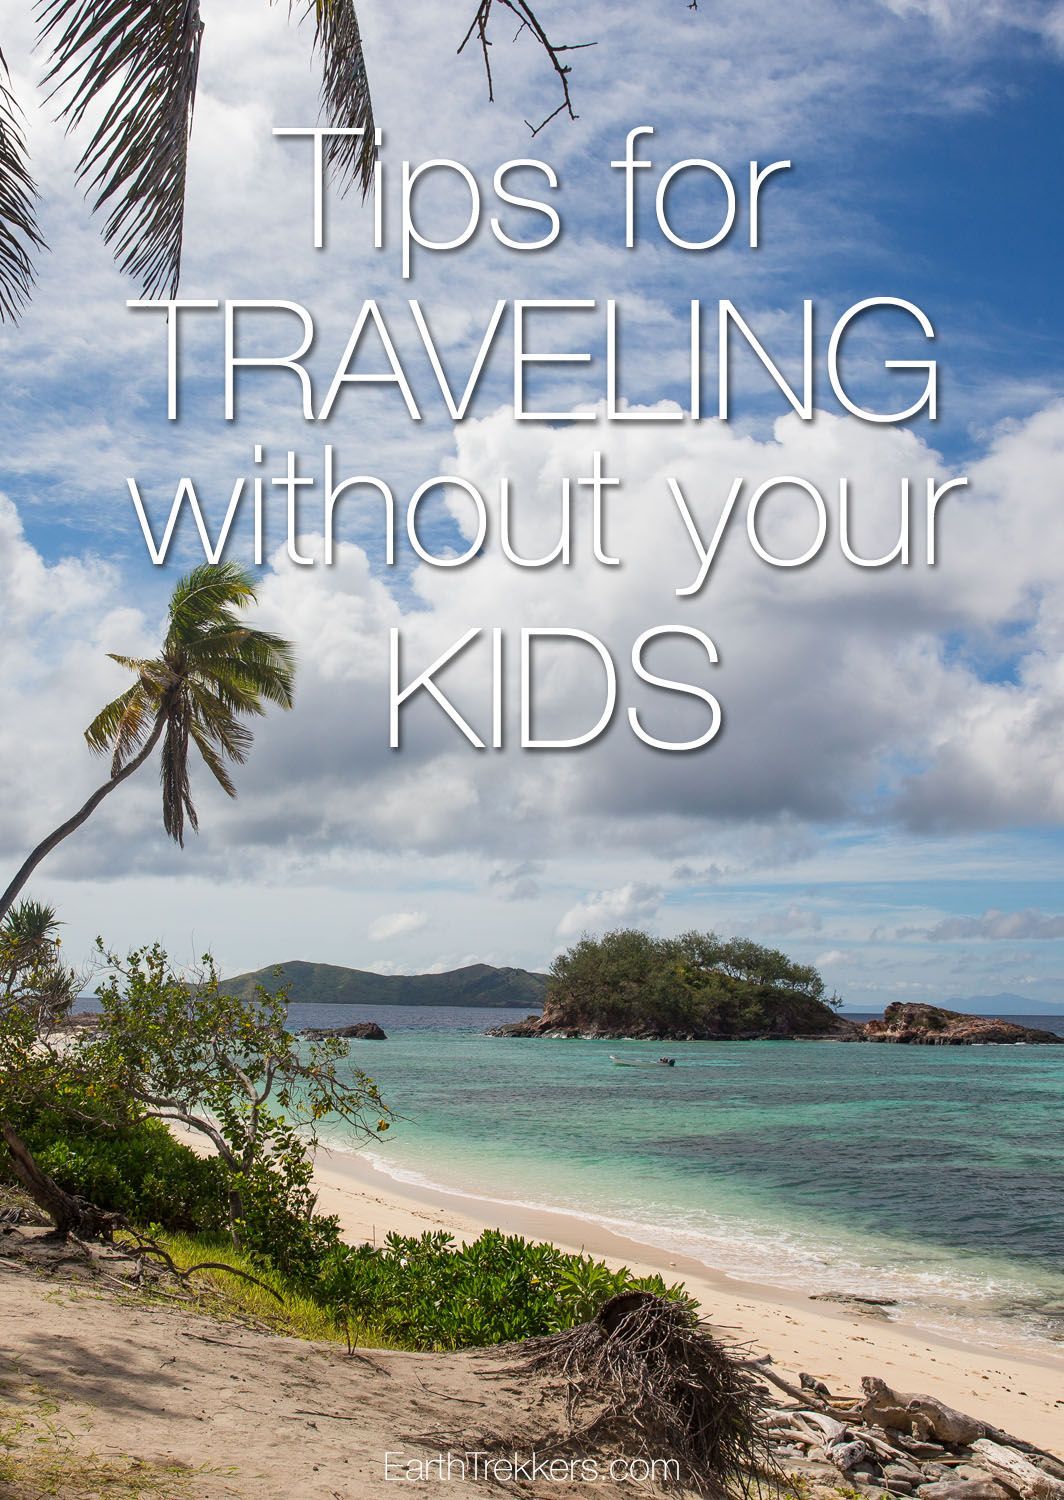 Travel Advice: Tips for Traveling without your kids